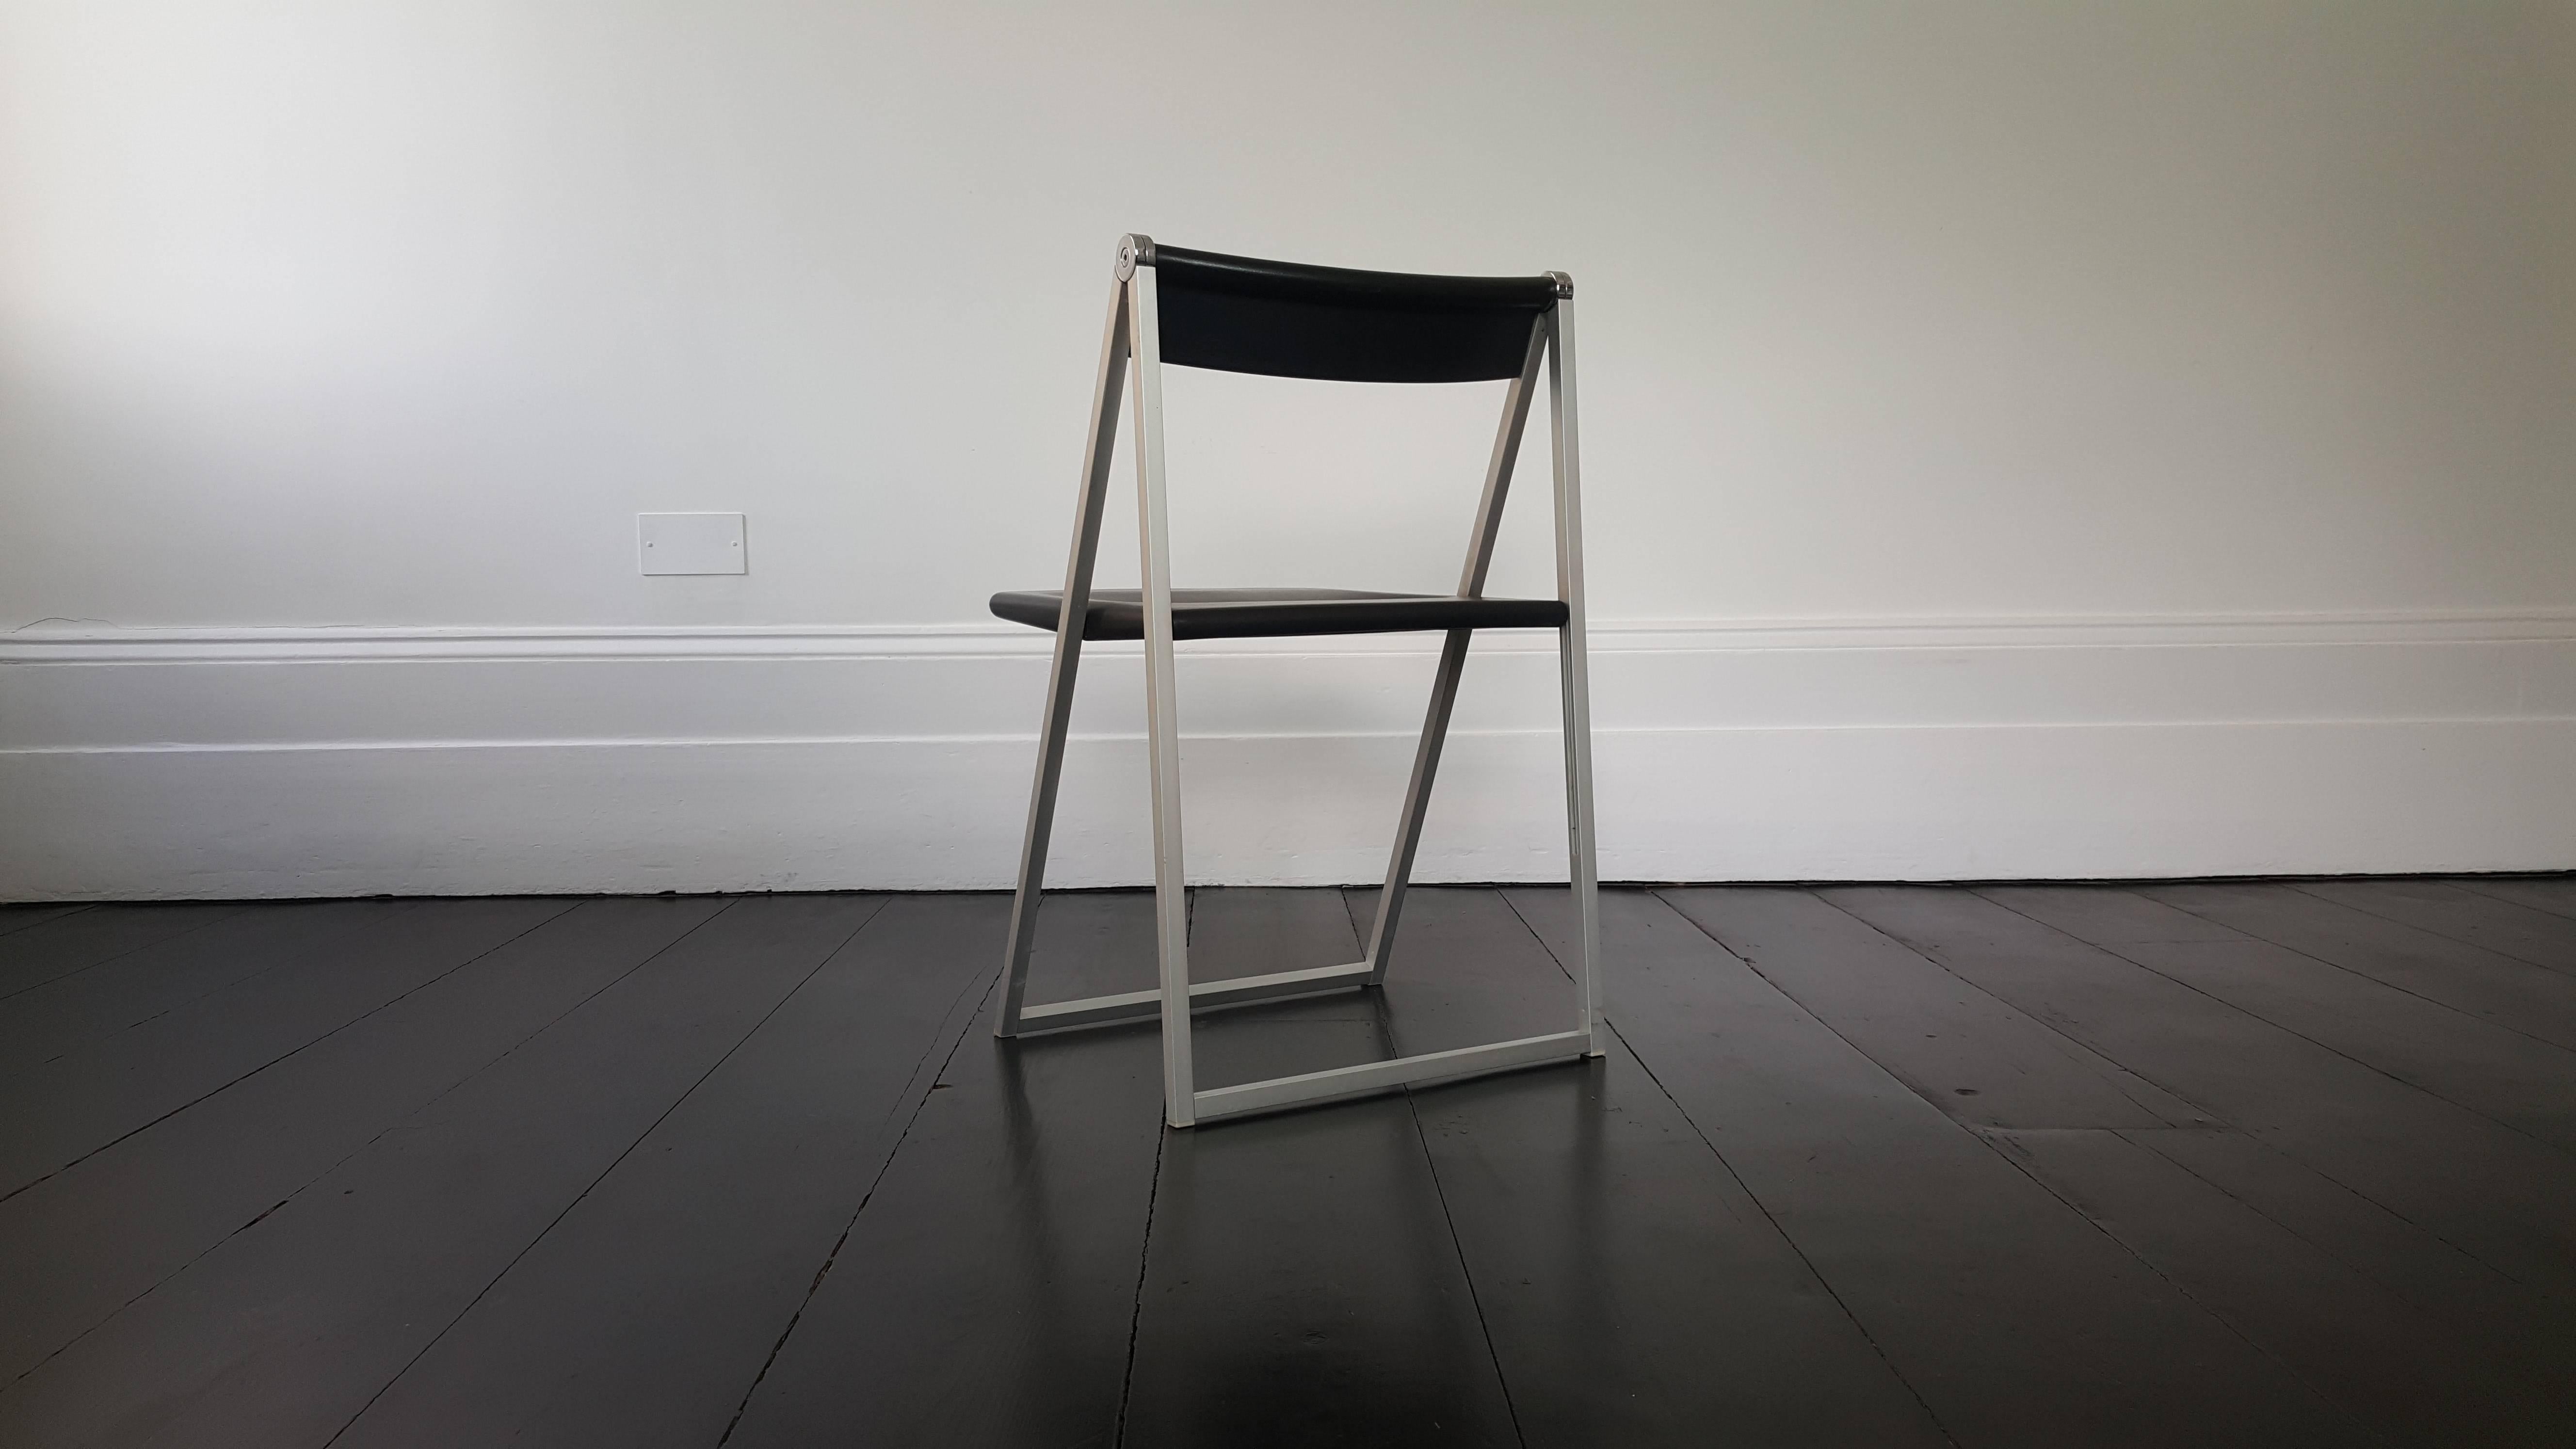 German Folding Chair, Designed in 1971 by Team Form AG, Manufactured by Interlübke